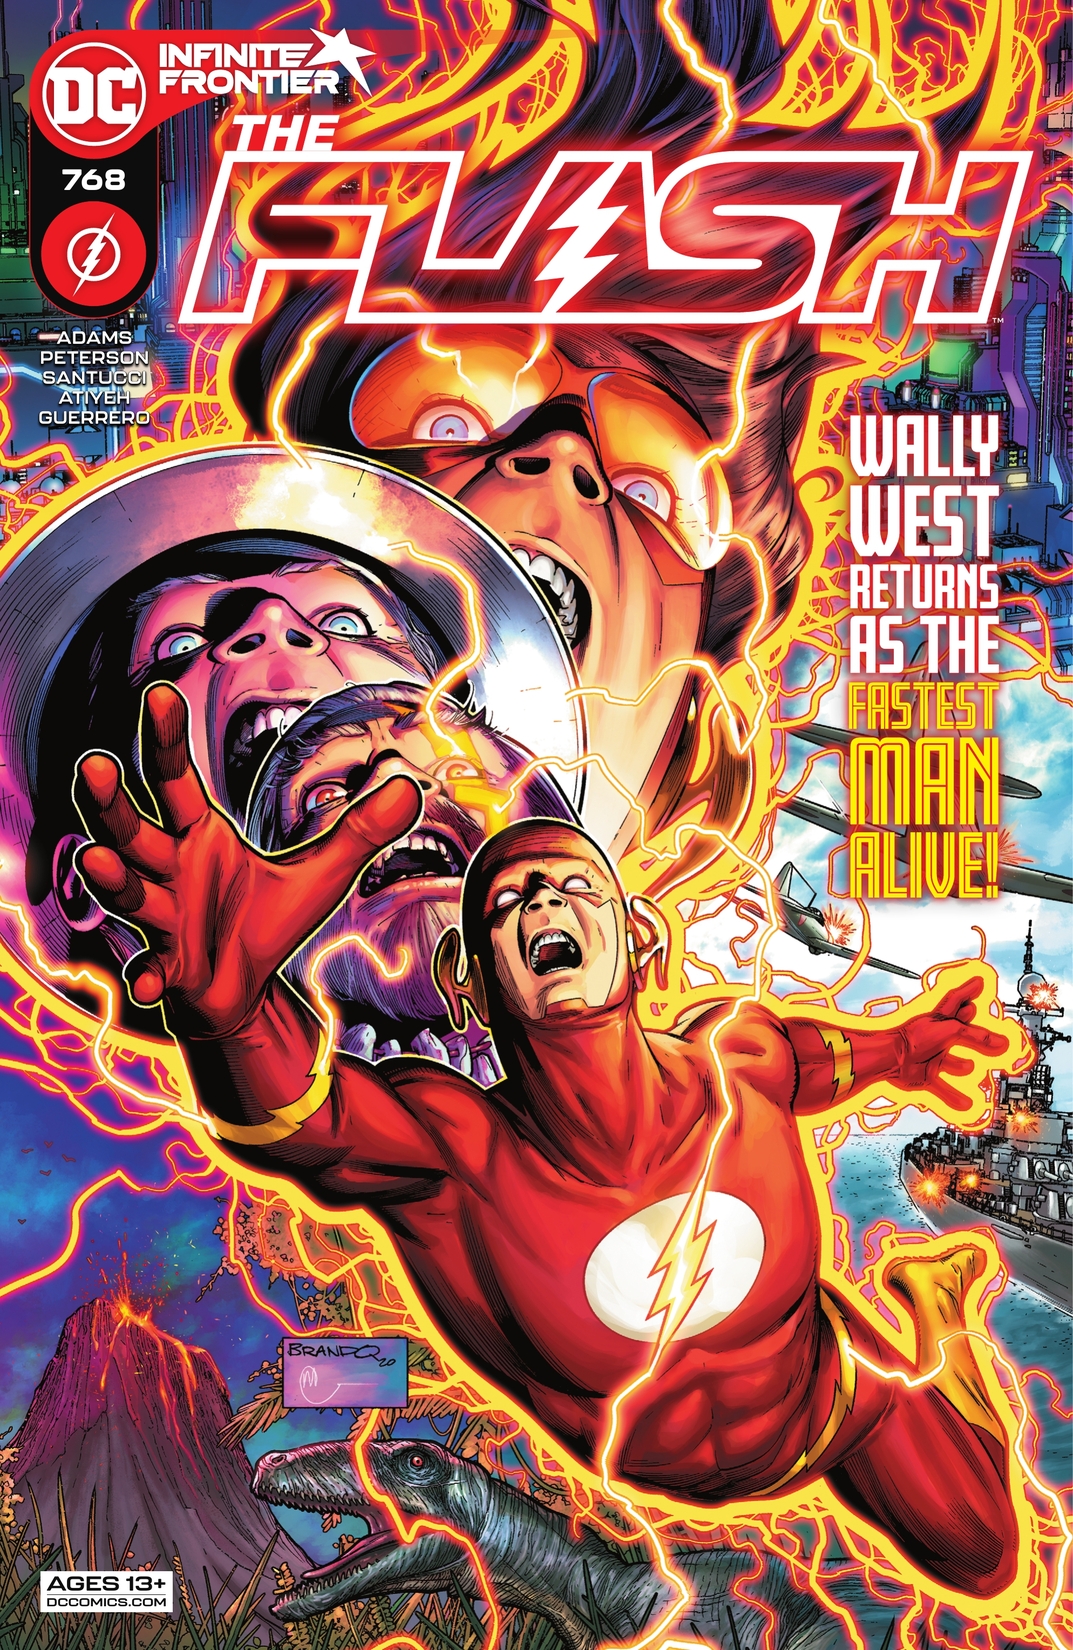 The Flash (2016-) #768 preview images